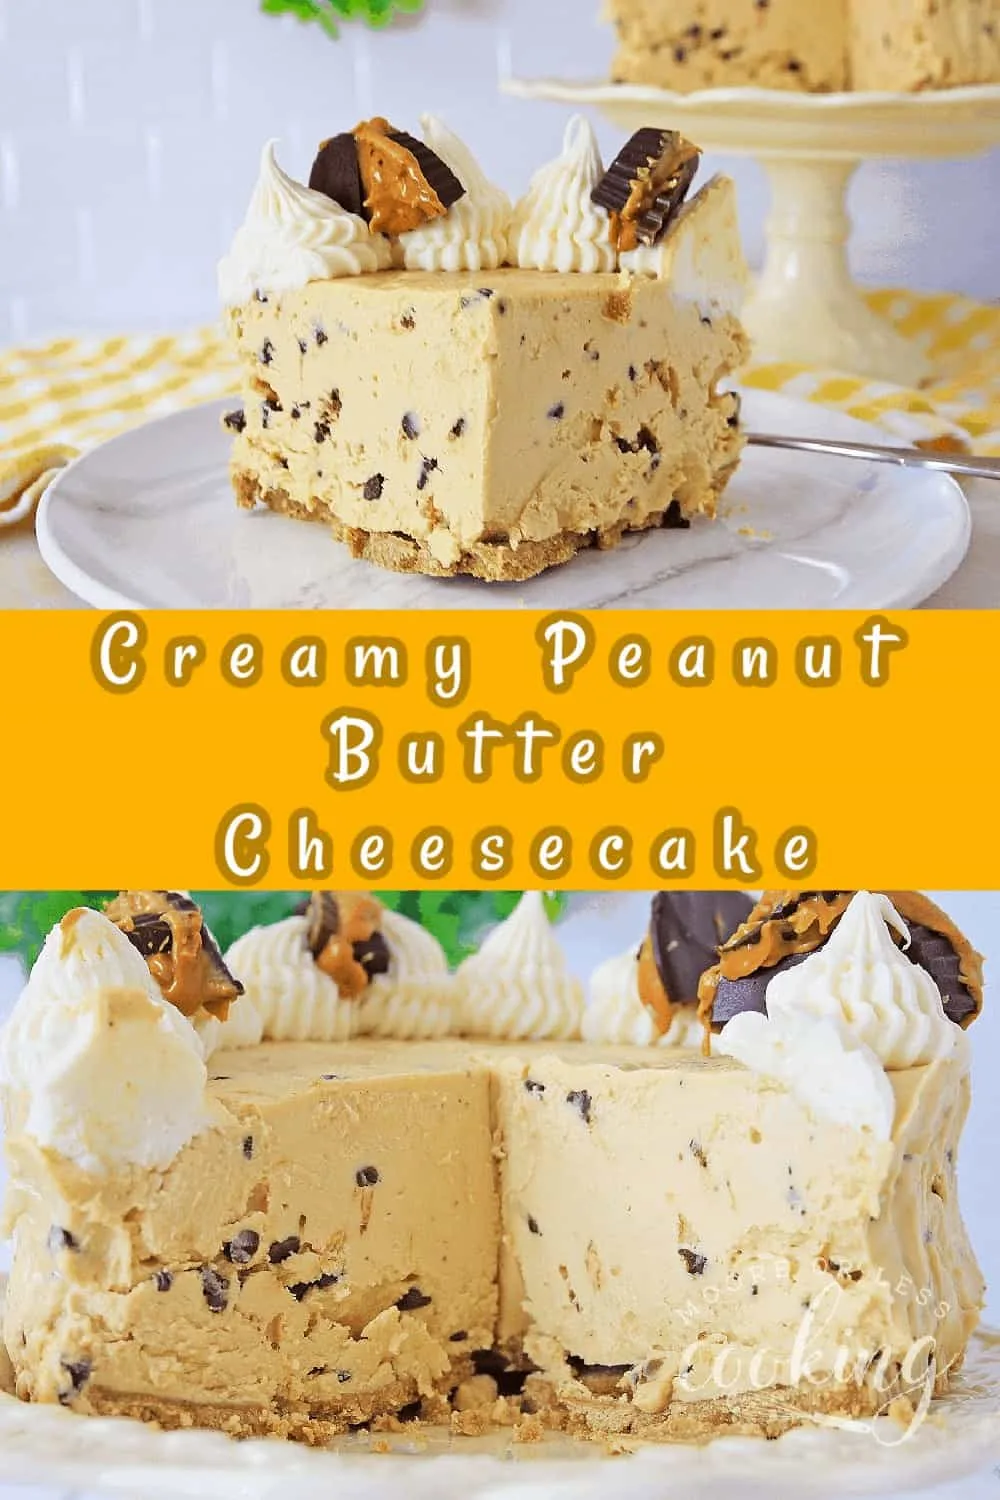 Enjoy a fantastic combination with no baking required when making this Peanut Butter Cheesecake. Peanut butter lovers unite to prepare this cheesecake that tastes just like a smooth peanut butter cup. via @Mooreorlesscook